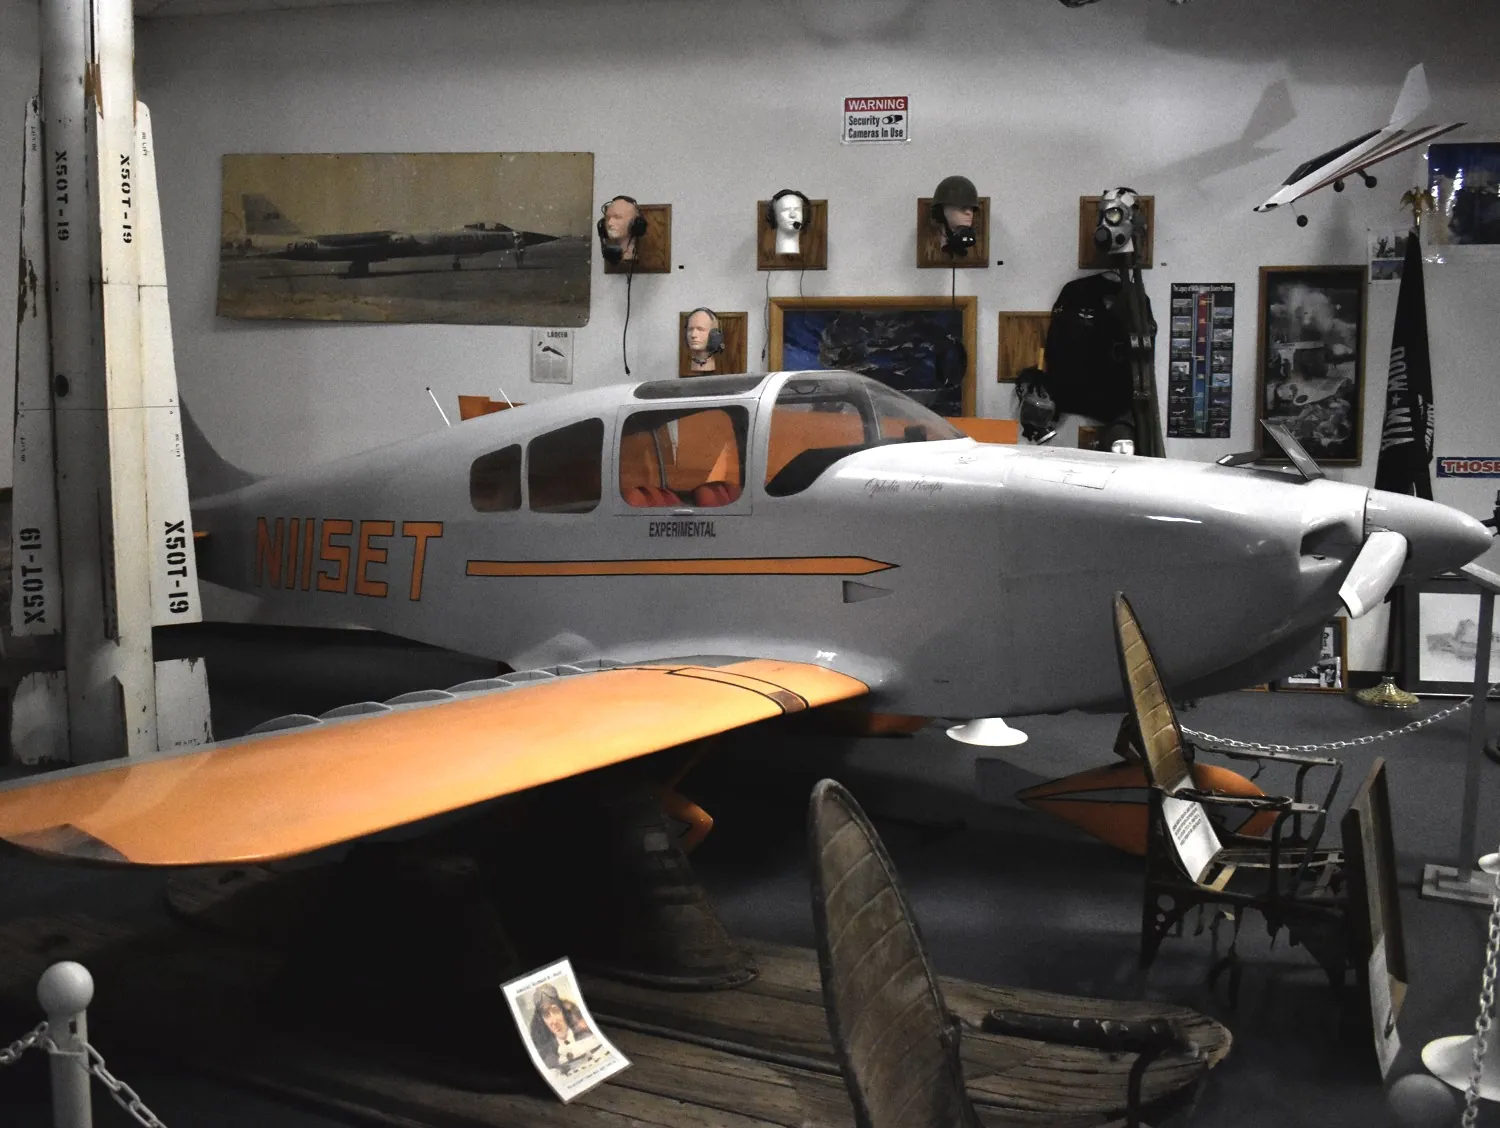 The Turner T-40 resting in the corner of the museum.